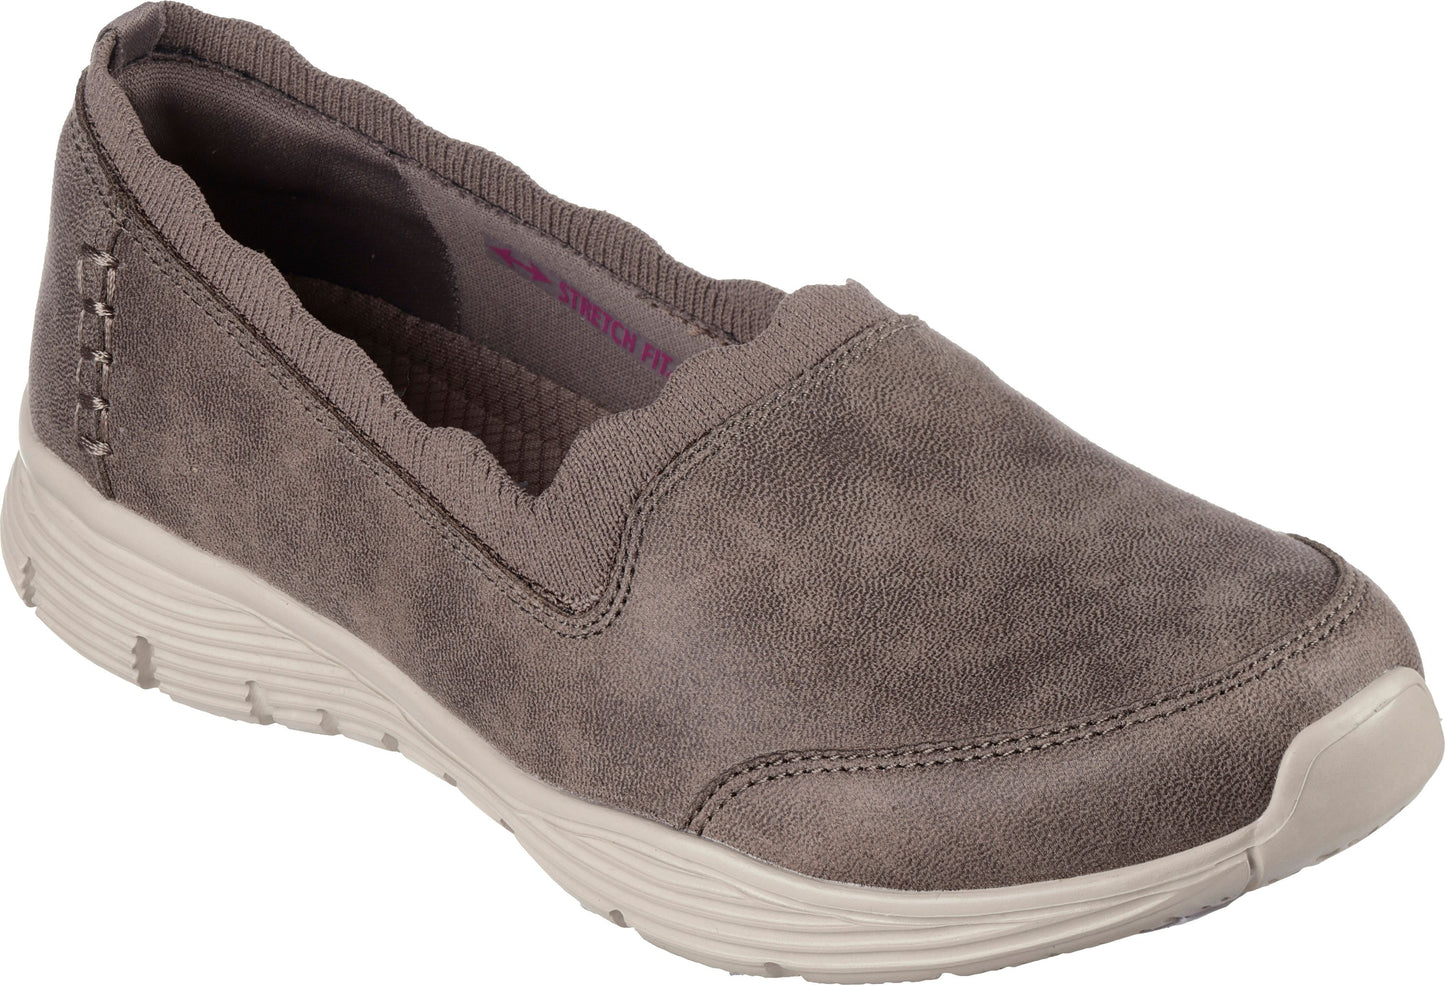 Skechers Shoes Seager Dark Taupe